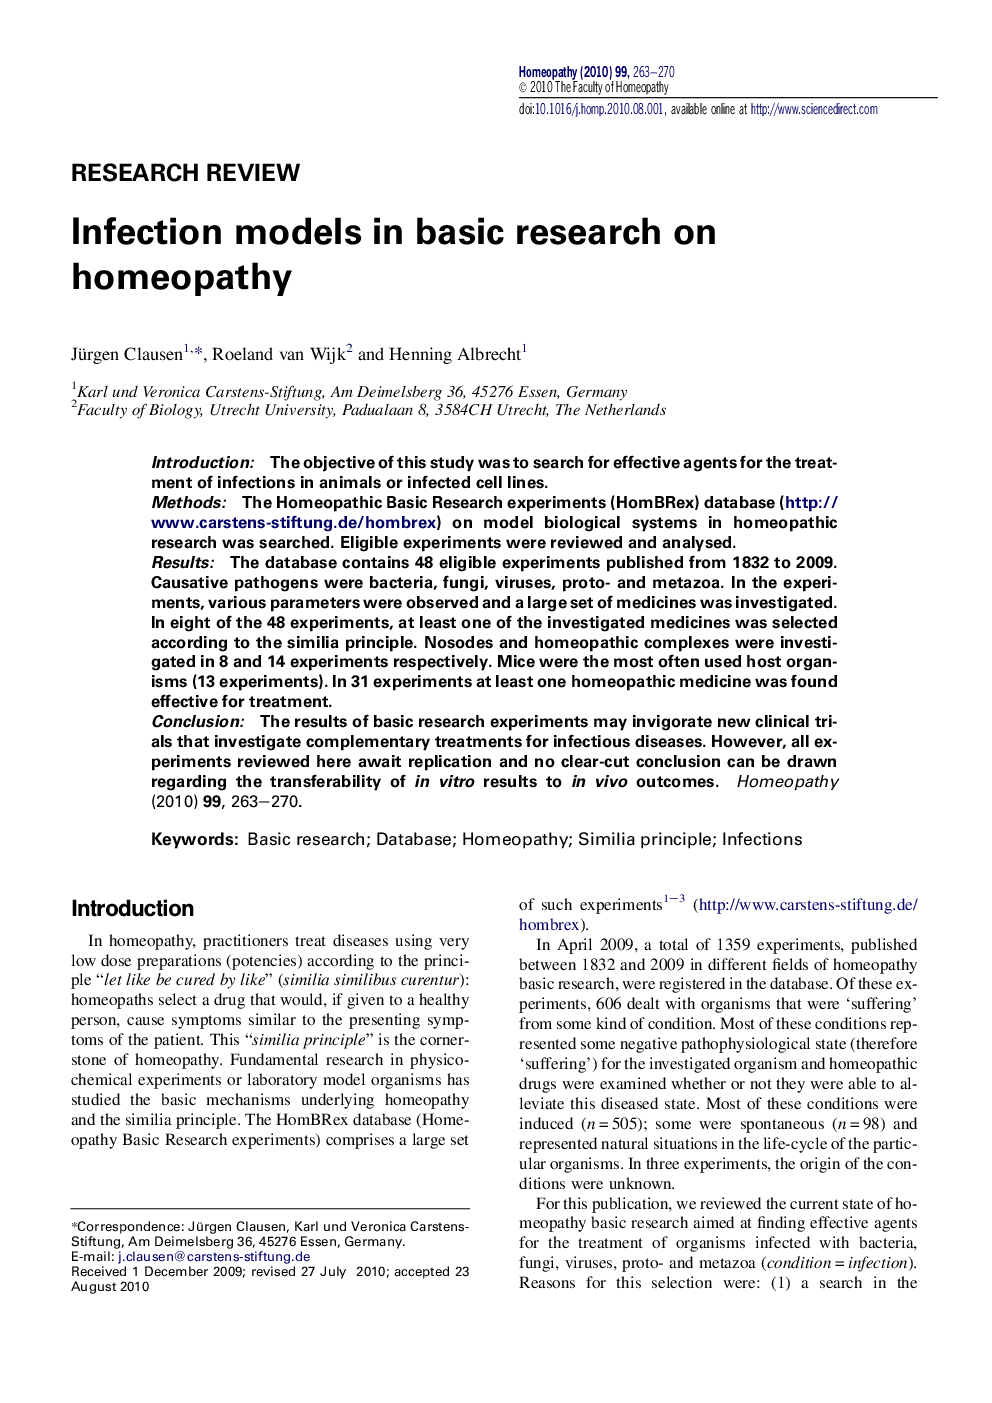 Infection models in basic research on homeopathy